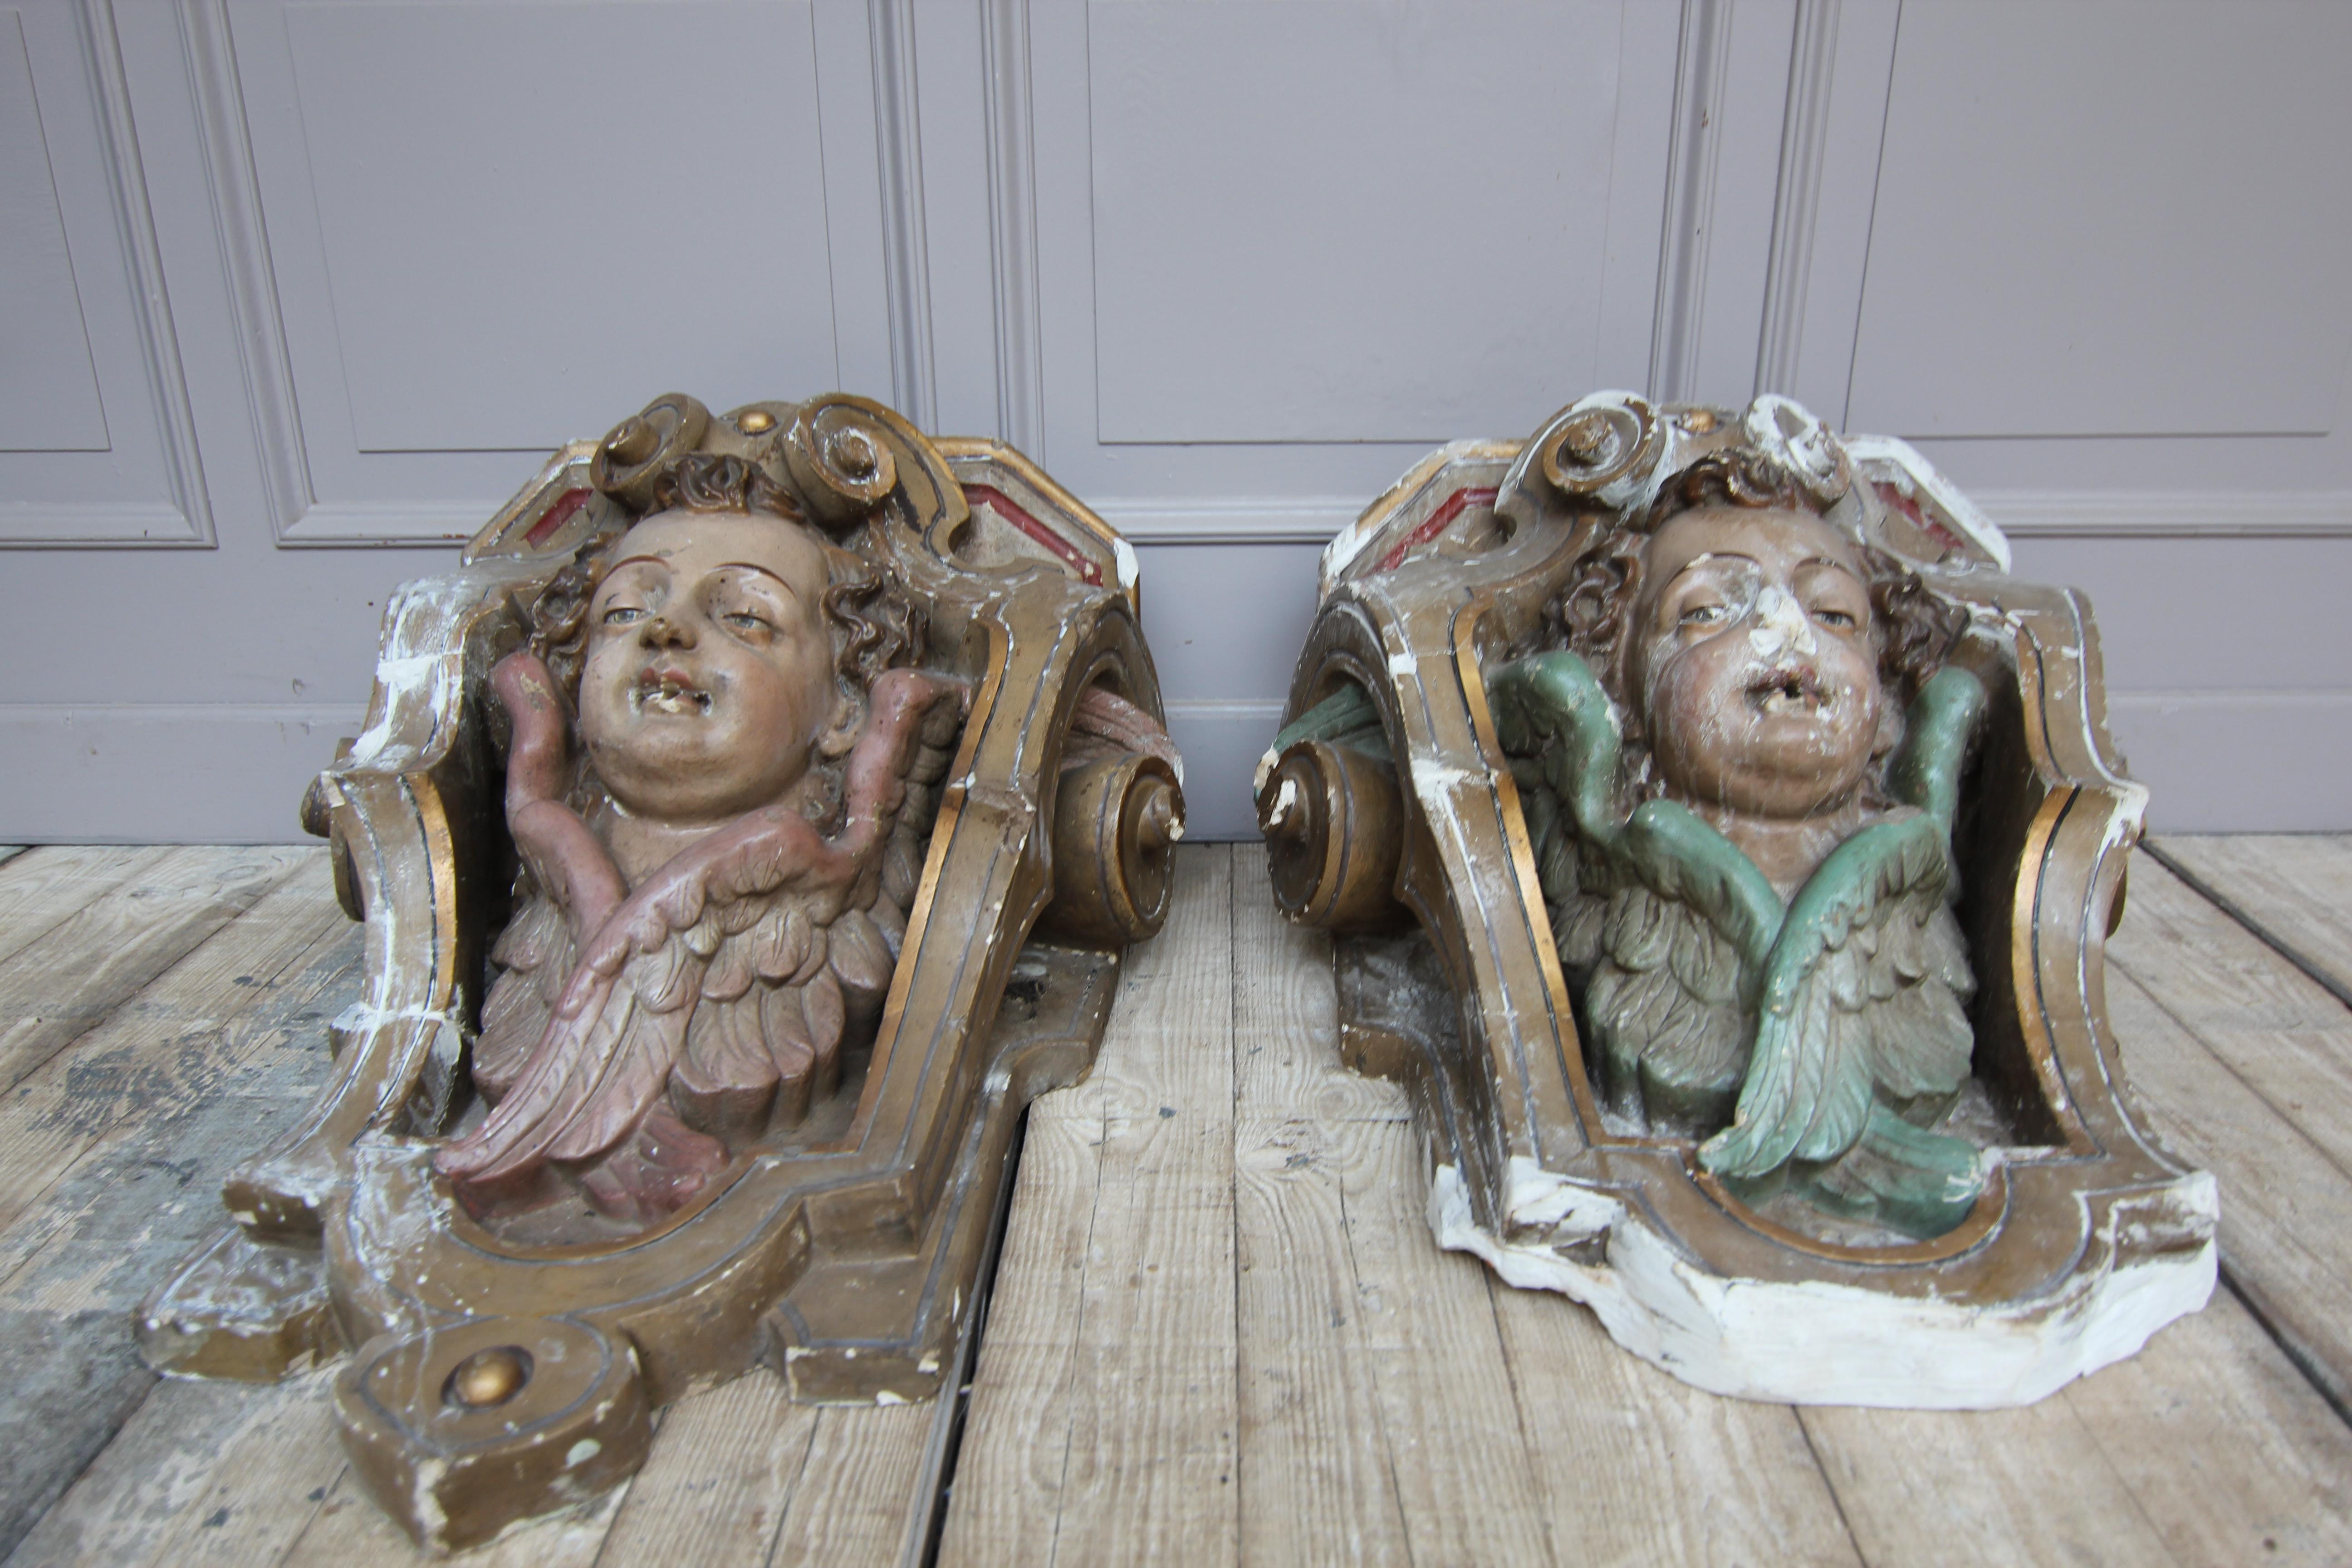 European 19th Century Rococo Revival Putti Wall Brackets made of Plaster, Set of 2 For Sale